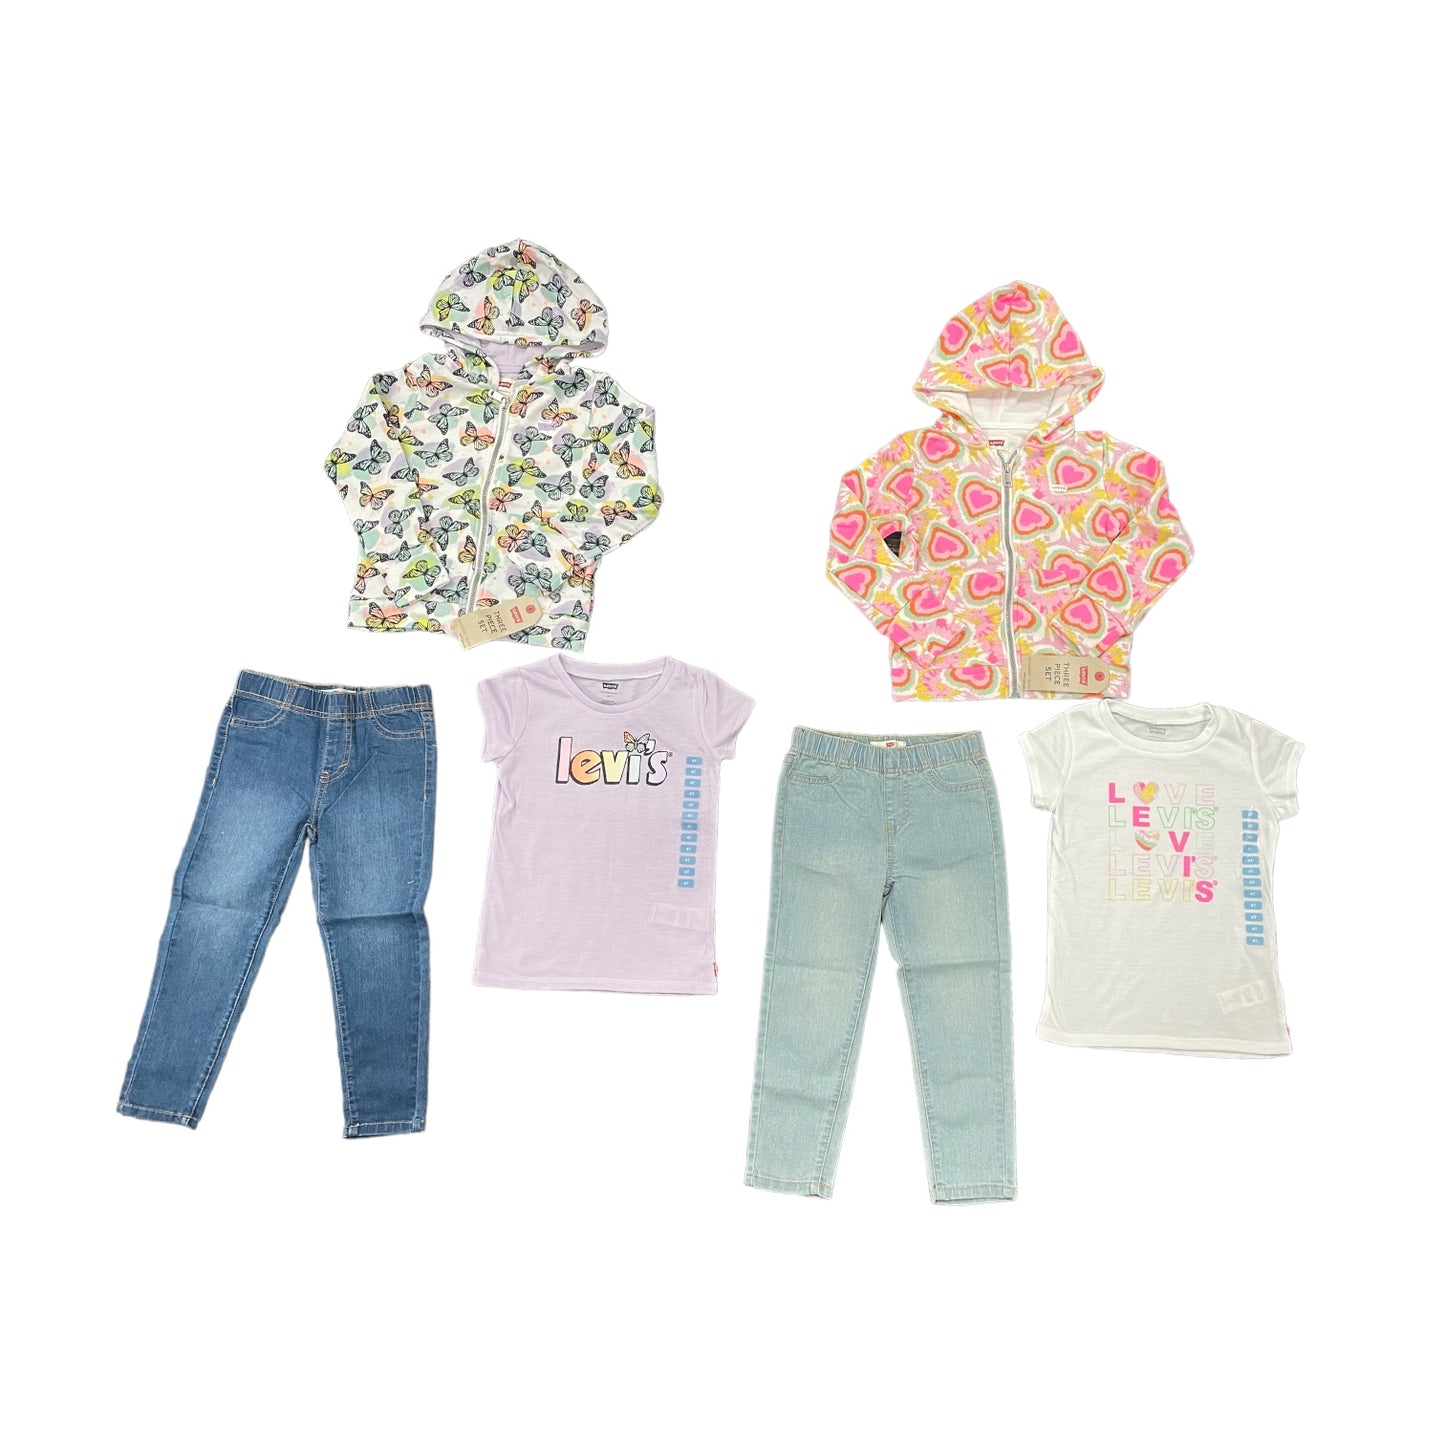 Levi's Girl's 3 Piece Zip Jacket Graphic T-Shirt and Denim Outfit Set